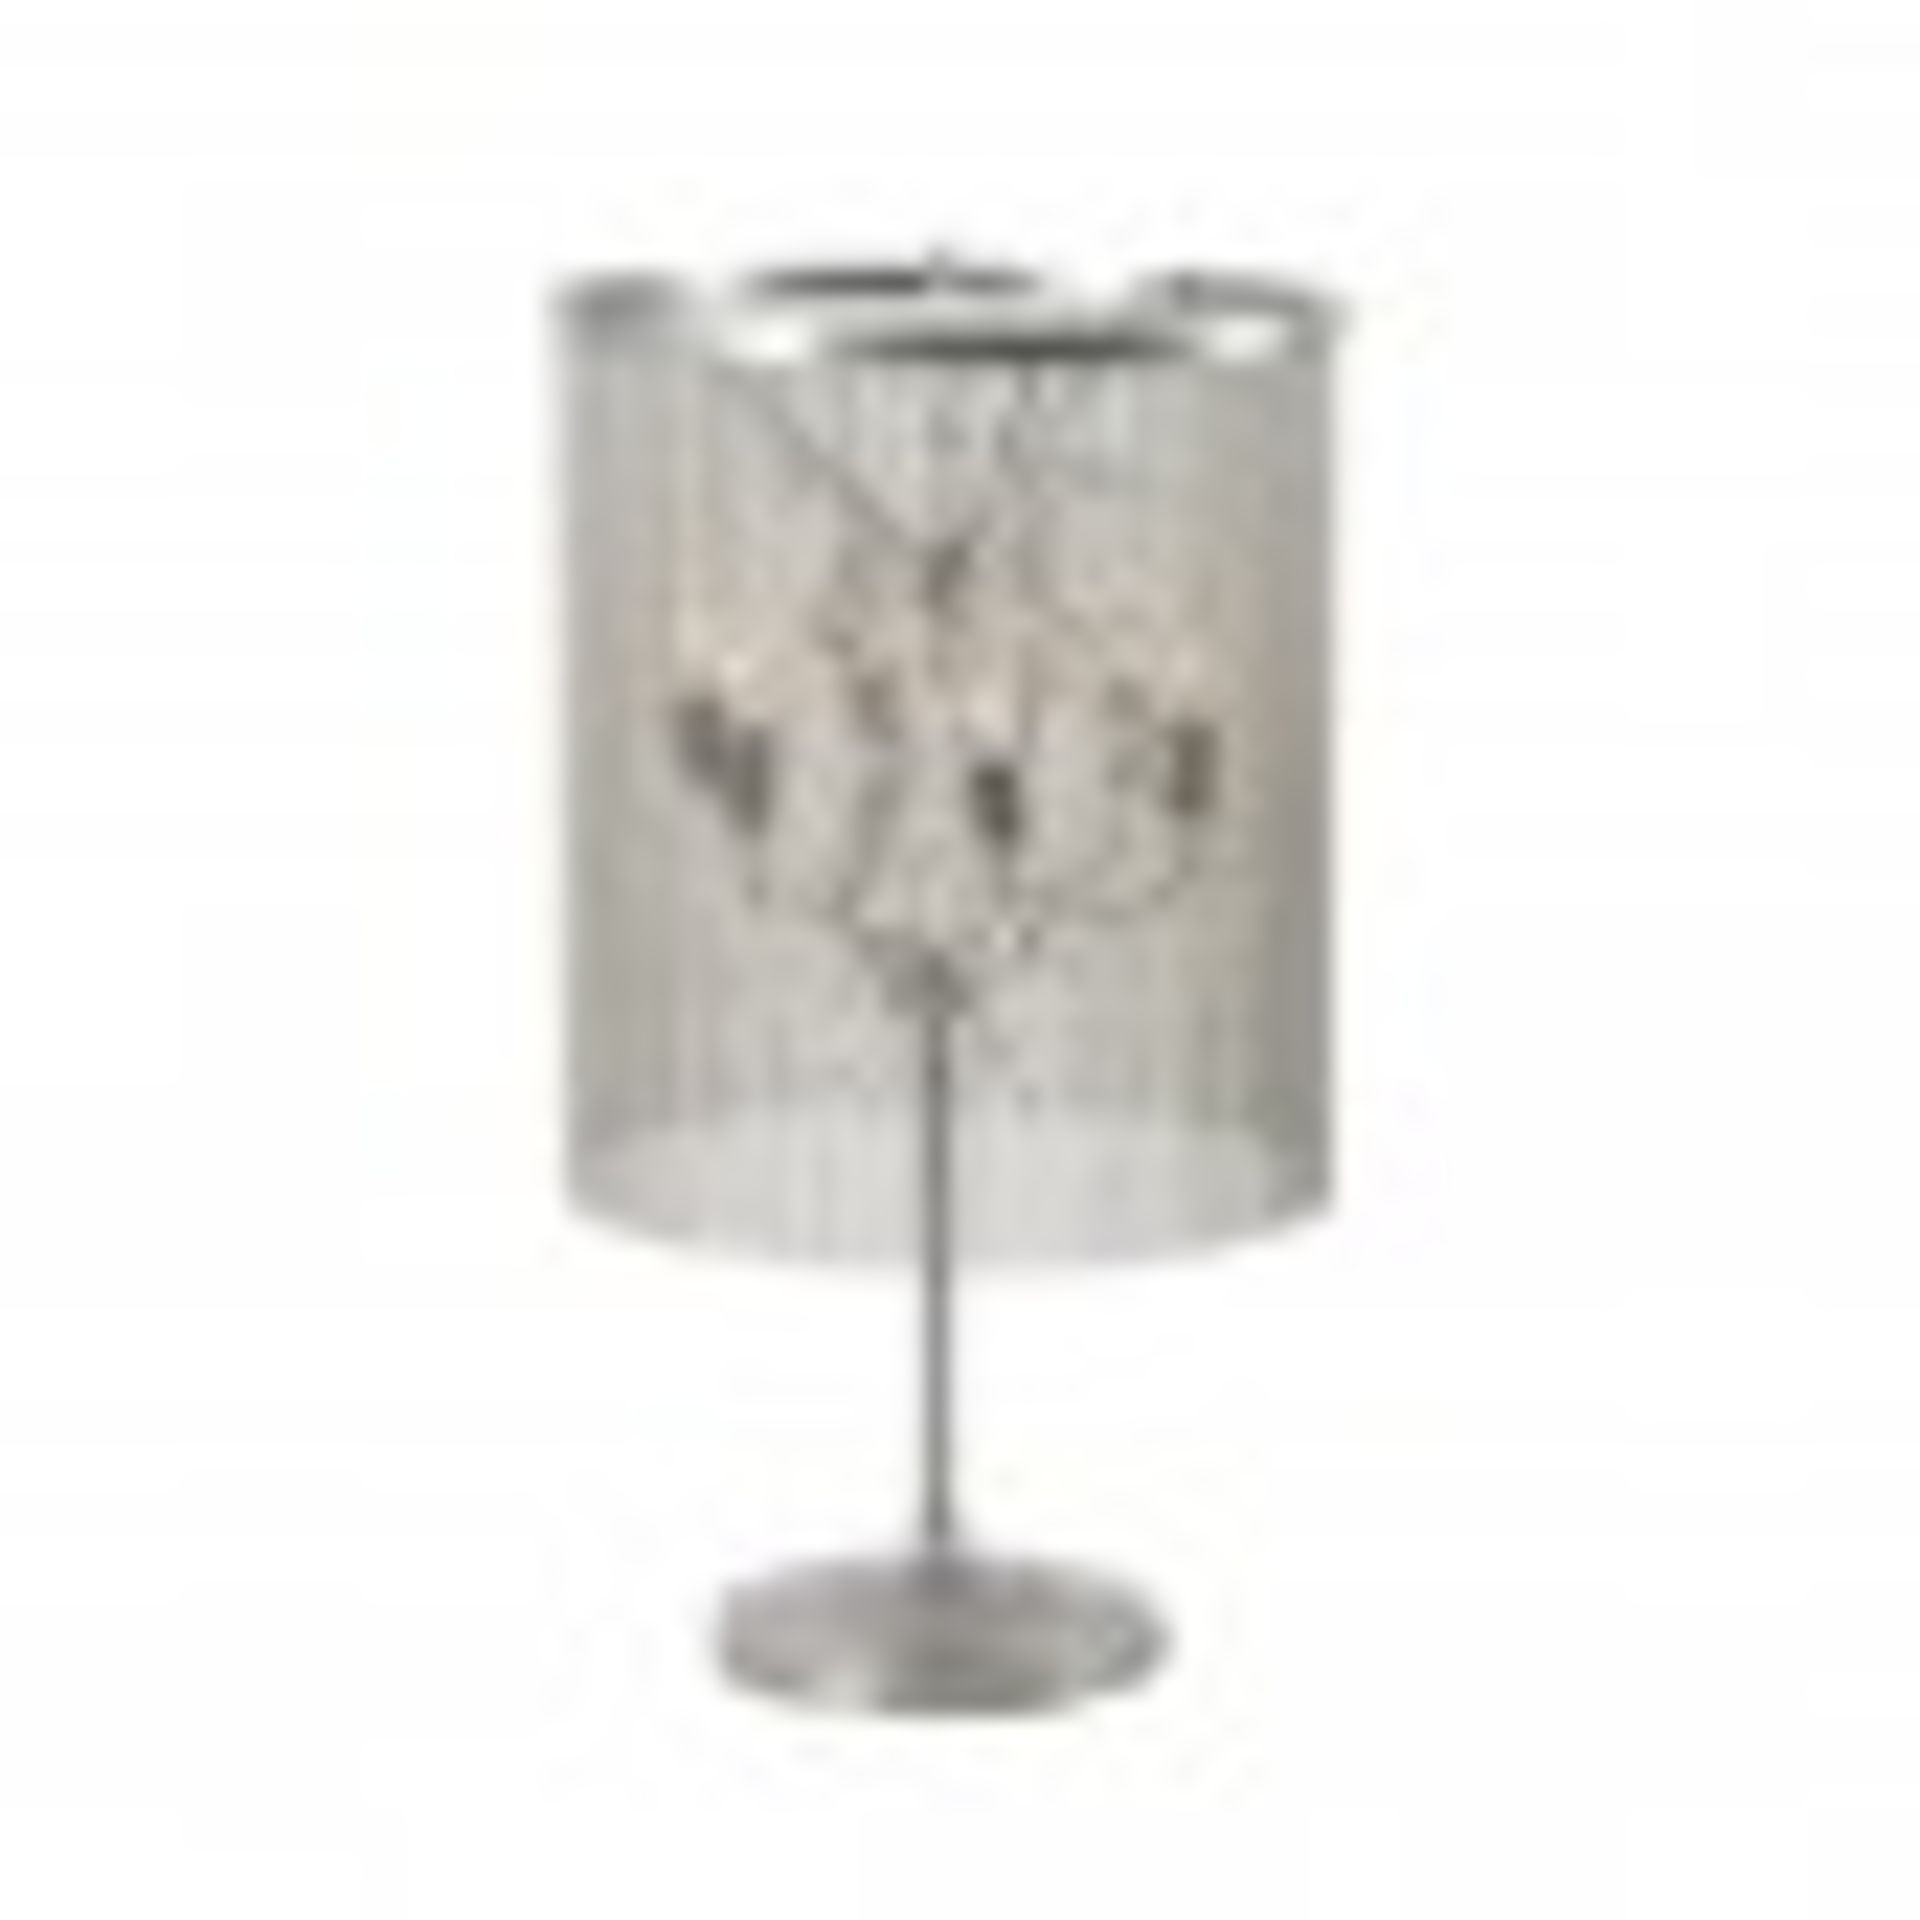 Chainmail Crystal Table Lamp Natural 52 X 52 X 82cm The Chainmail Crystal amp Is A Modernised - Image 2 of 2